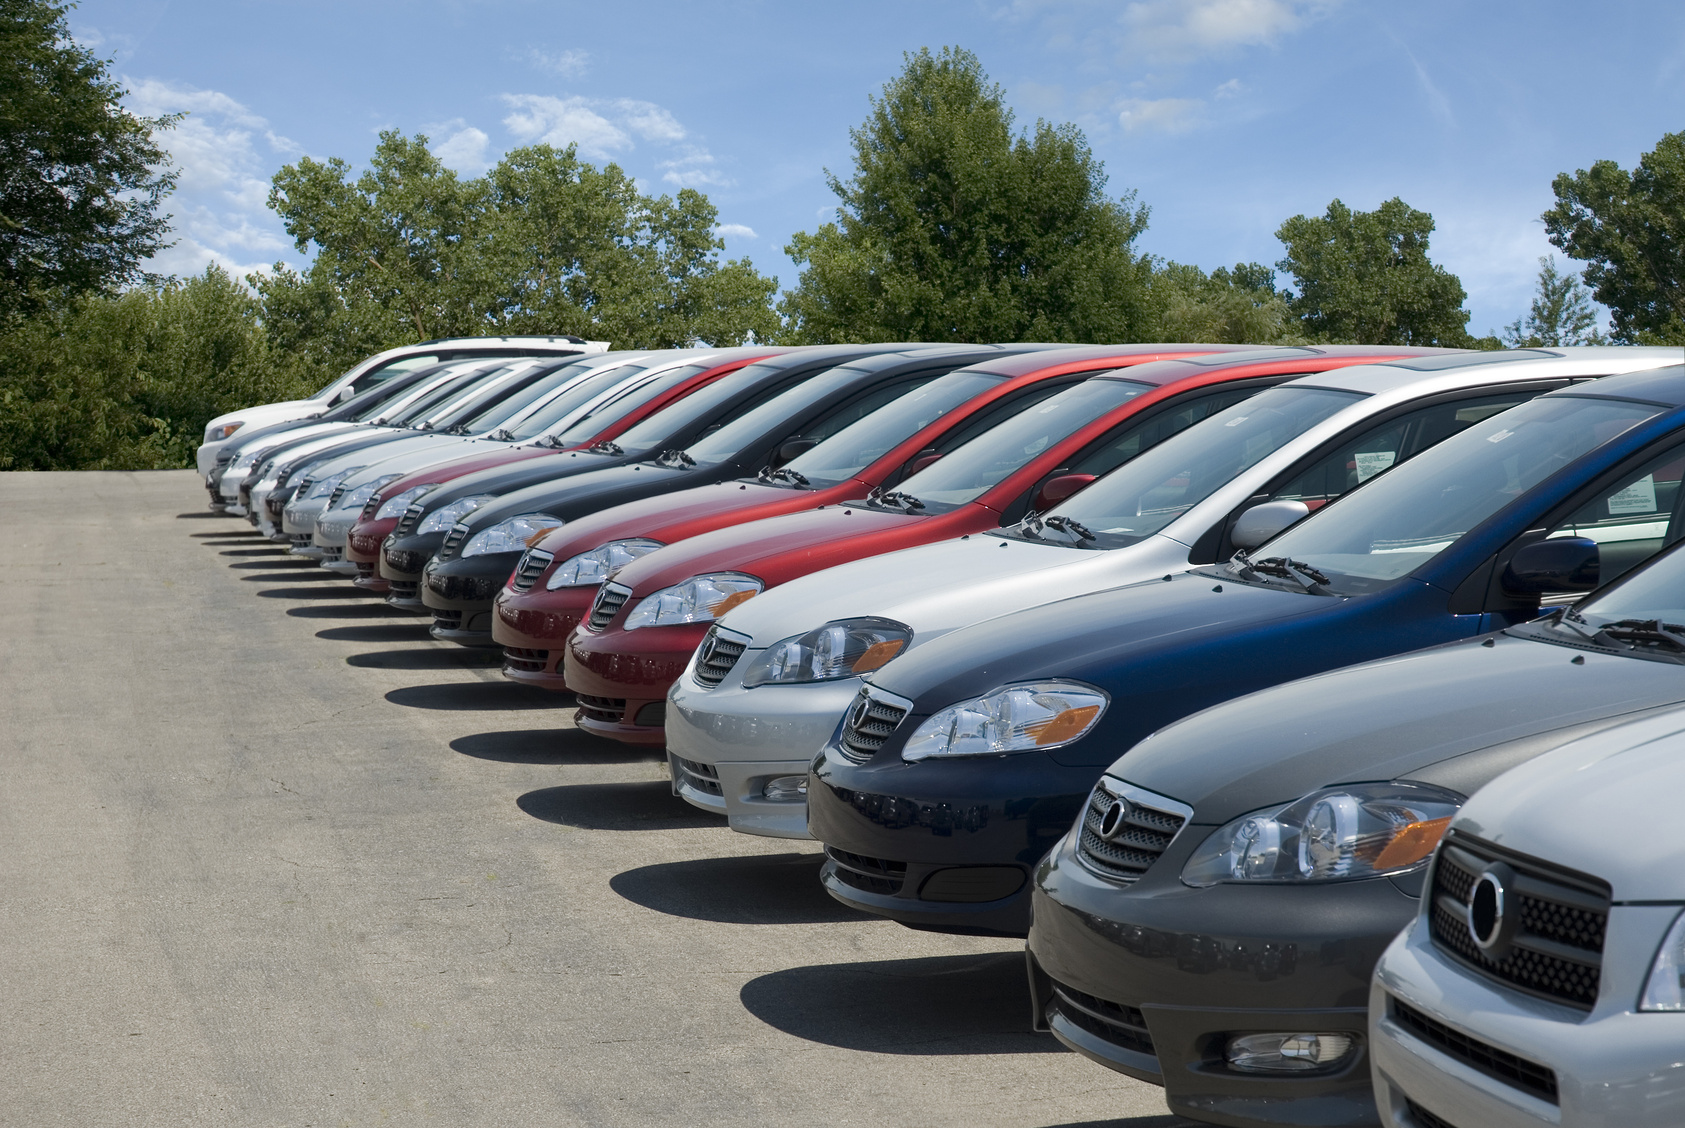 Used car sales set to build on record six-year high, according to industry report